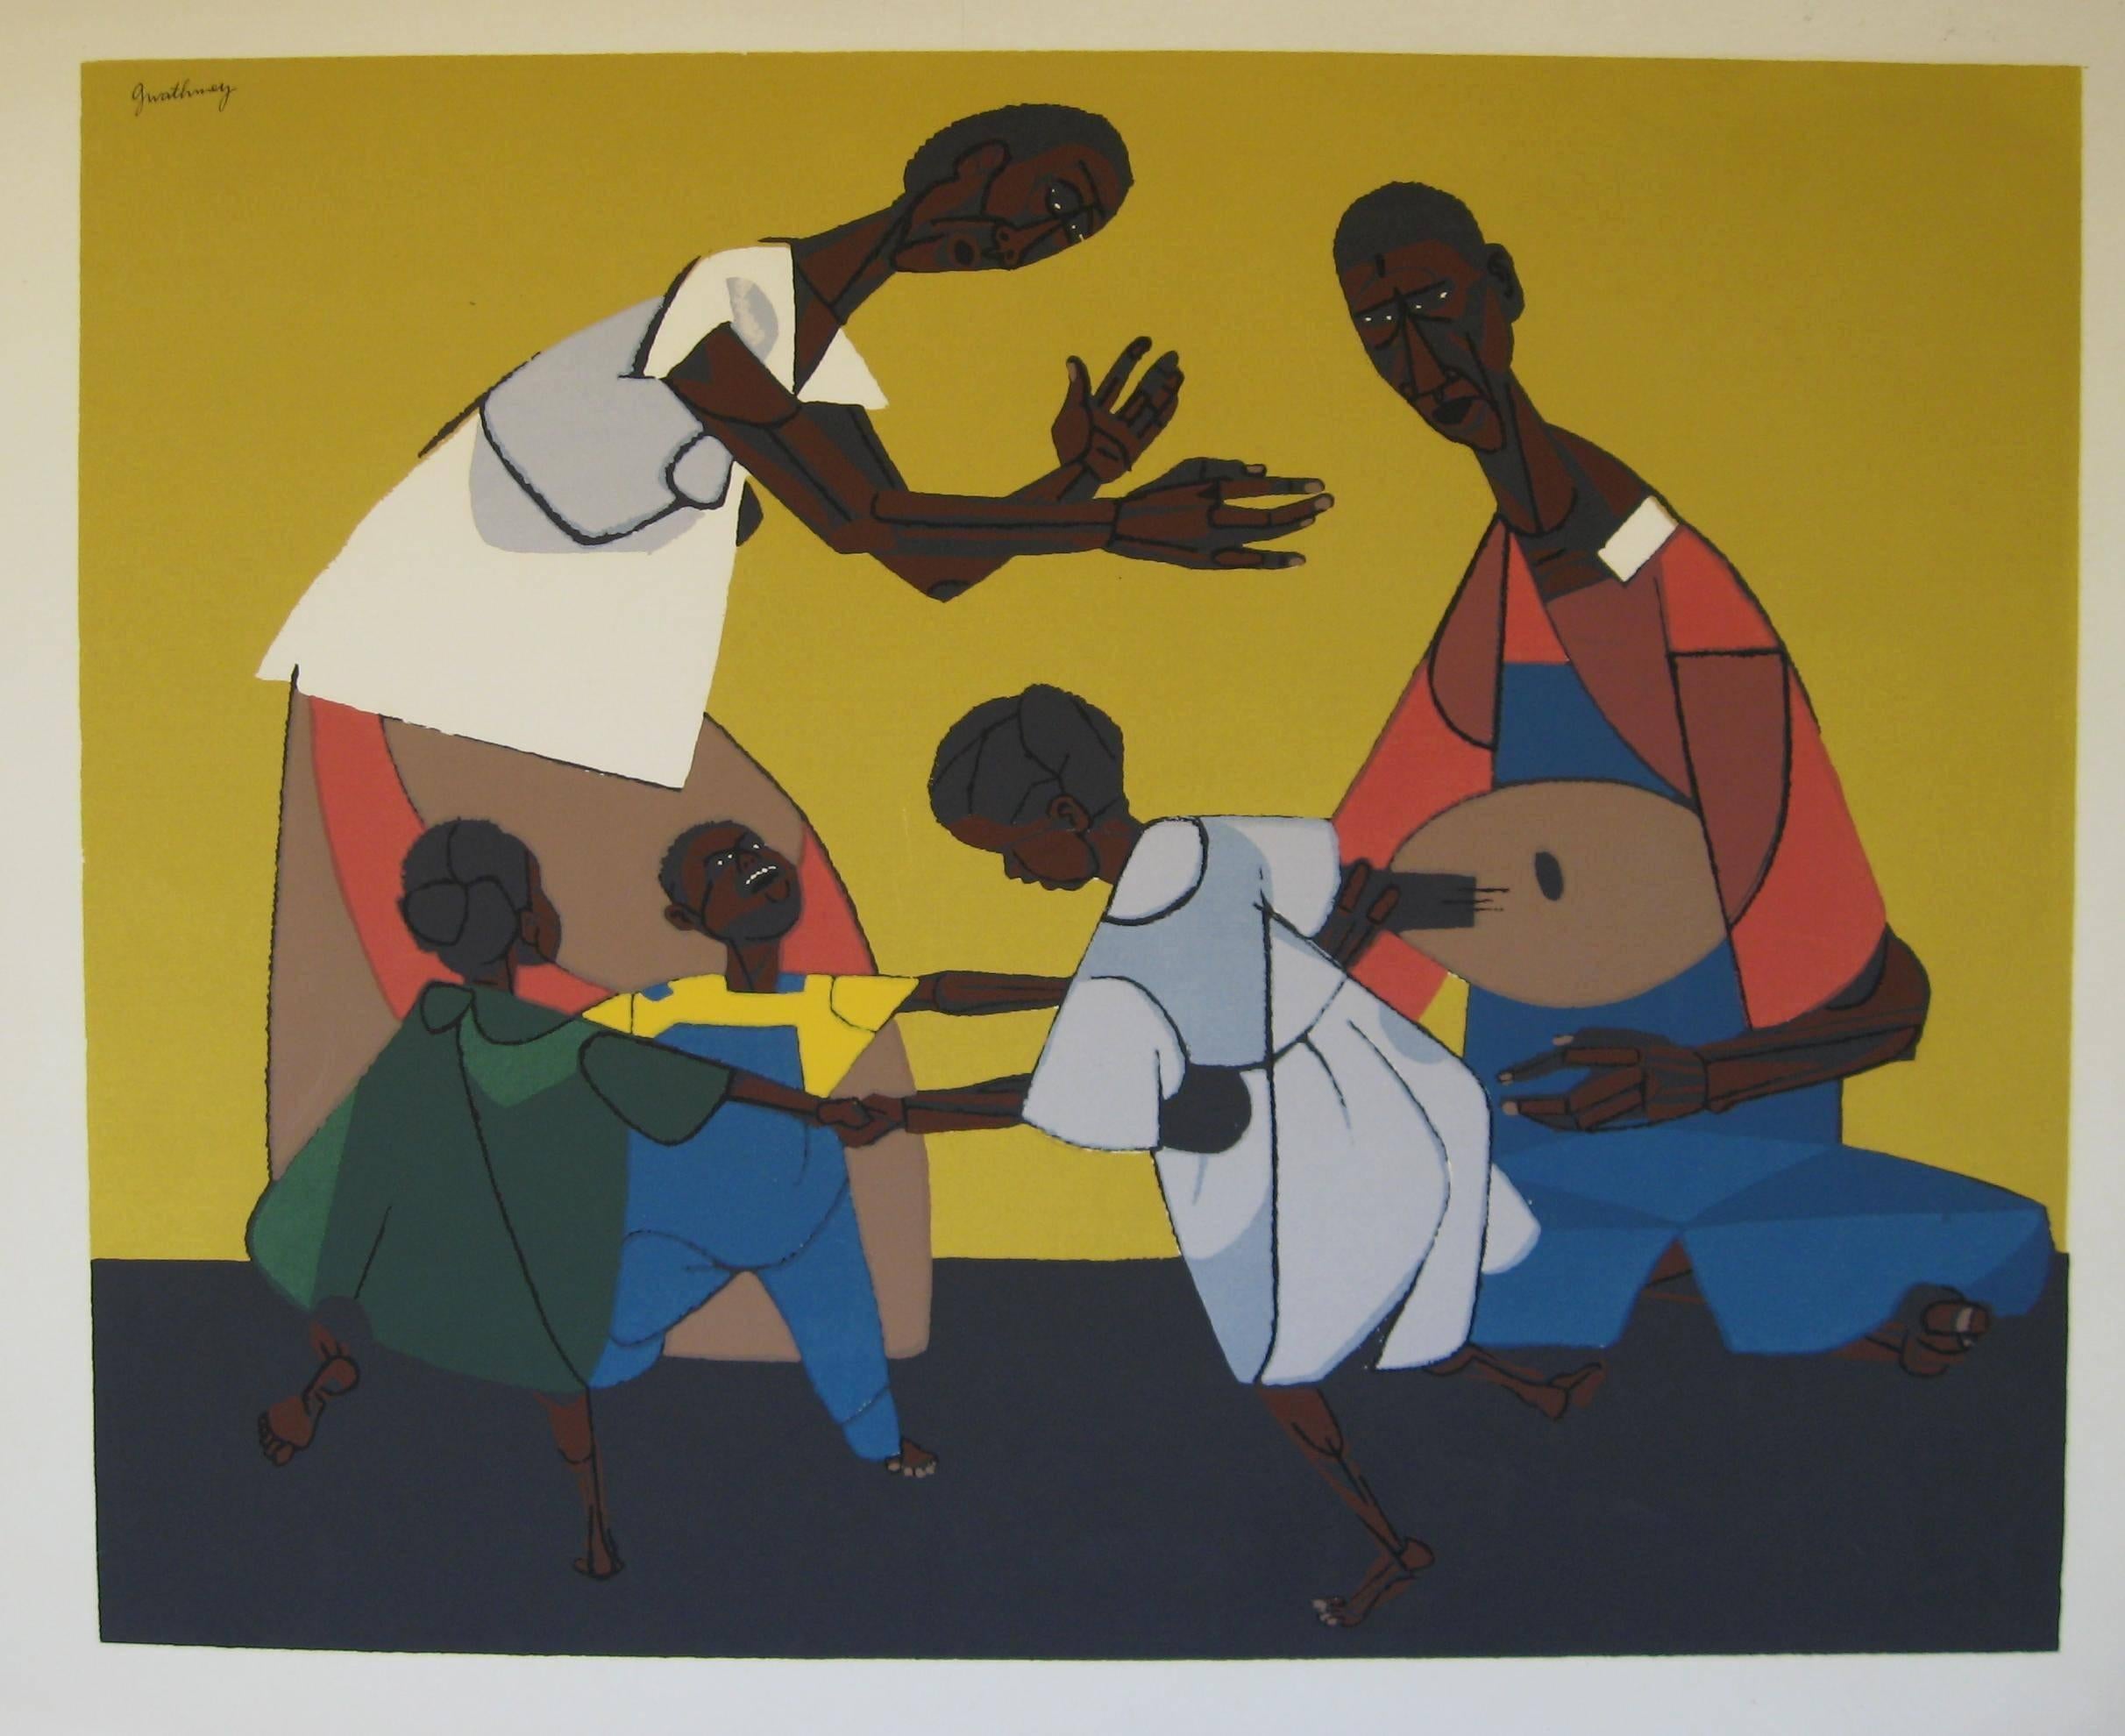 Robert Gwathmey Serigraph
Titled: Ring around the Rosey
Signed in ink upper left. Edition: 200
Created 1949. In excellent condition, unframed.
Image size: 12.75